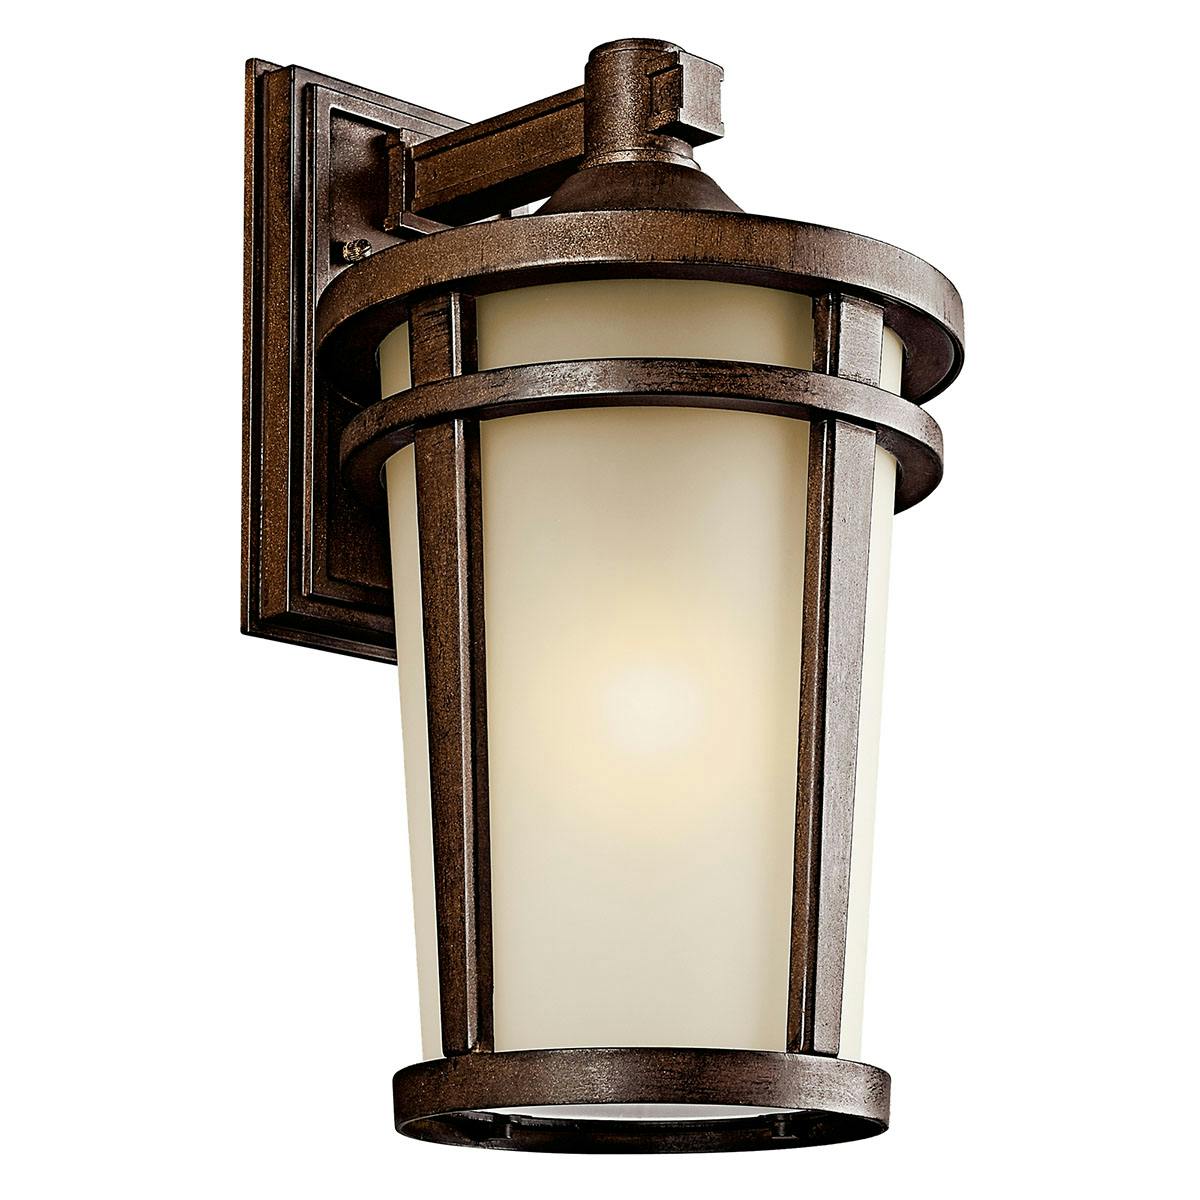 The Atwood 17.75" Wall Light Brown Stone on a white background